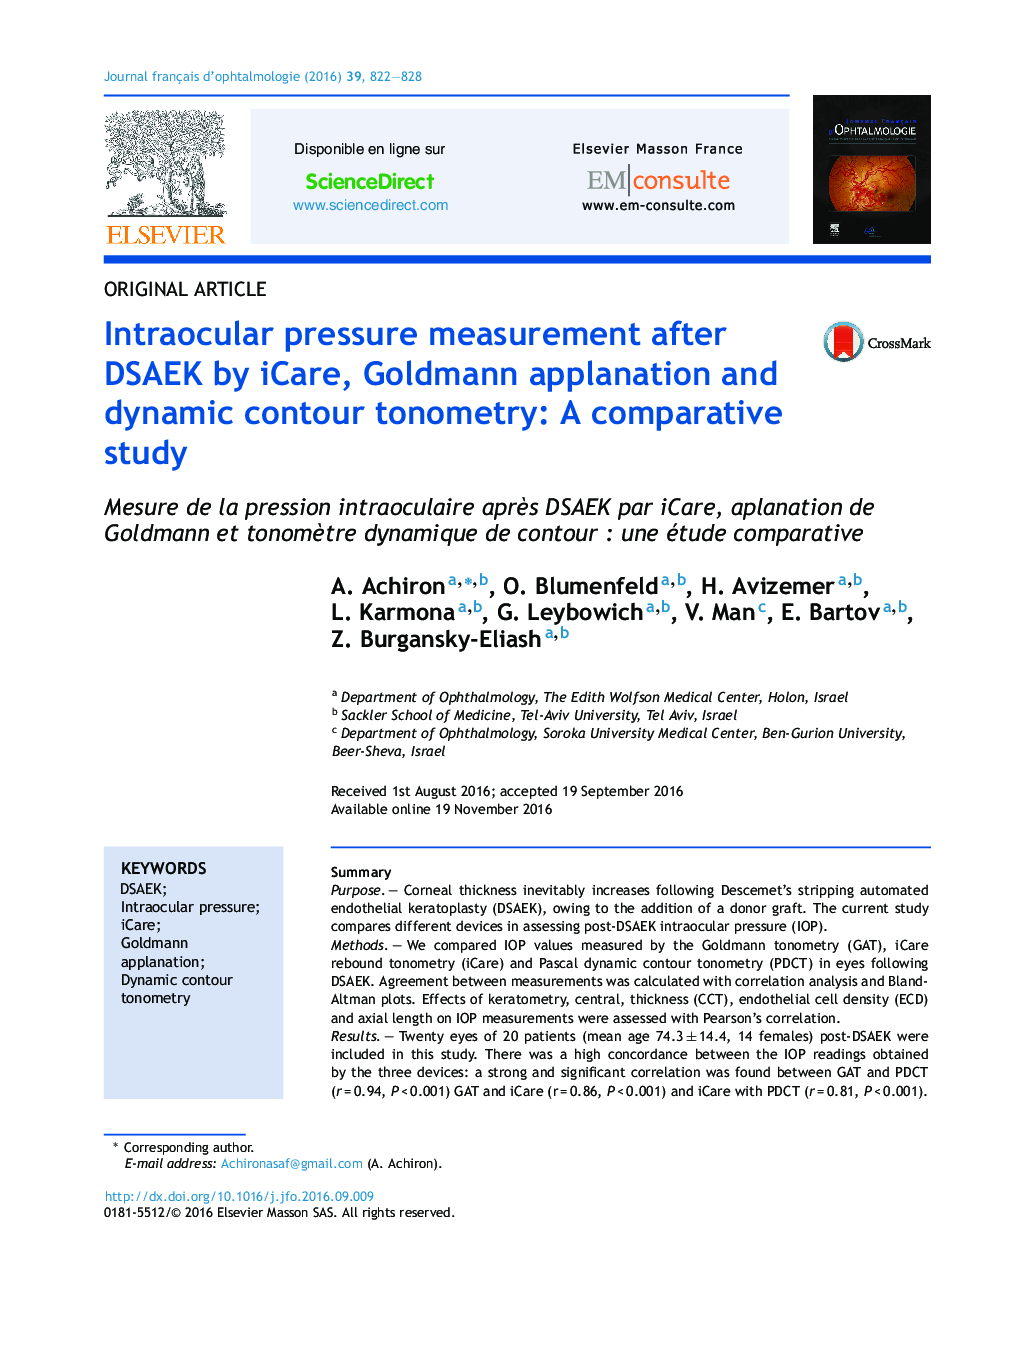 Intraocular pressure measurement after DSAEK by iCare, Goldmann applanation and dynamic contour tonometry: A comparative study